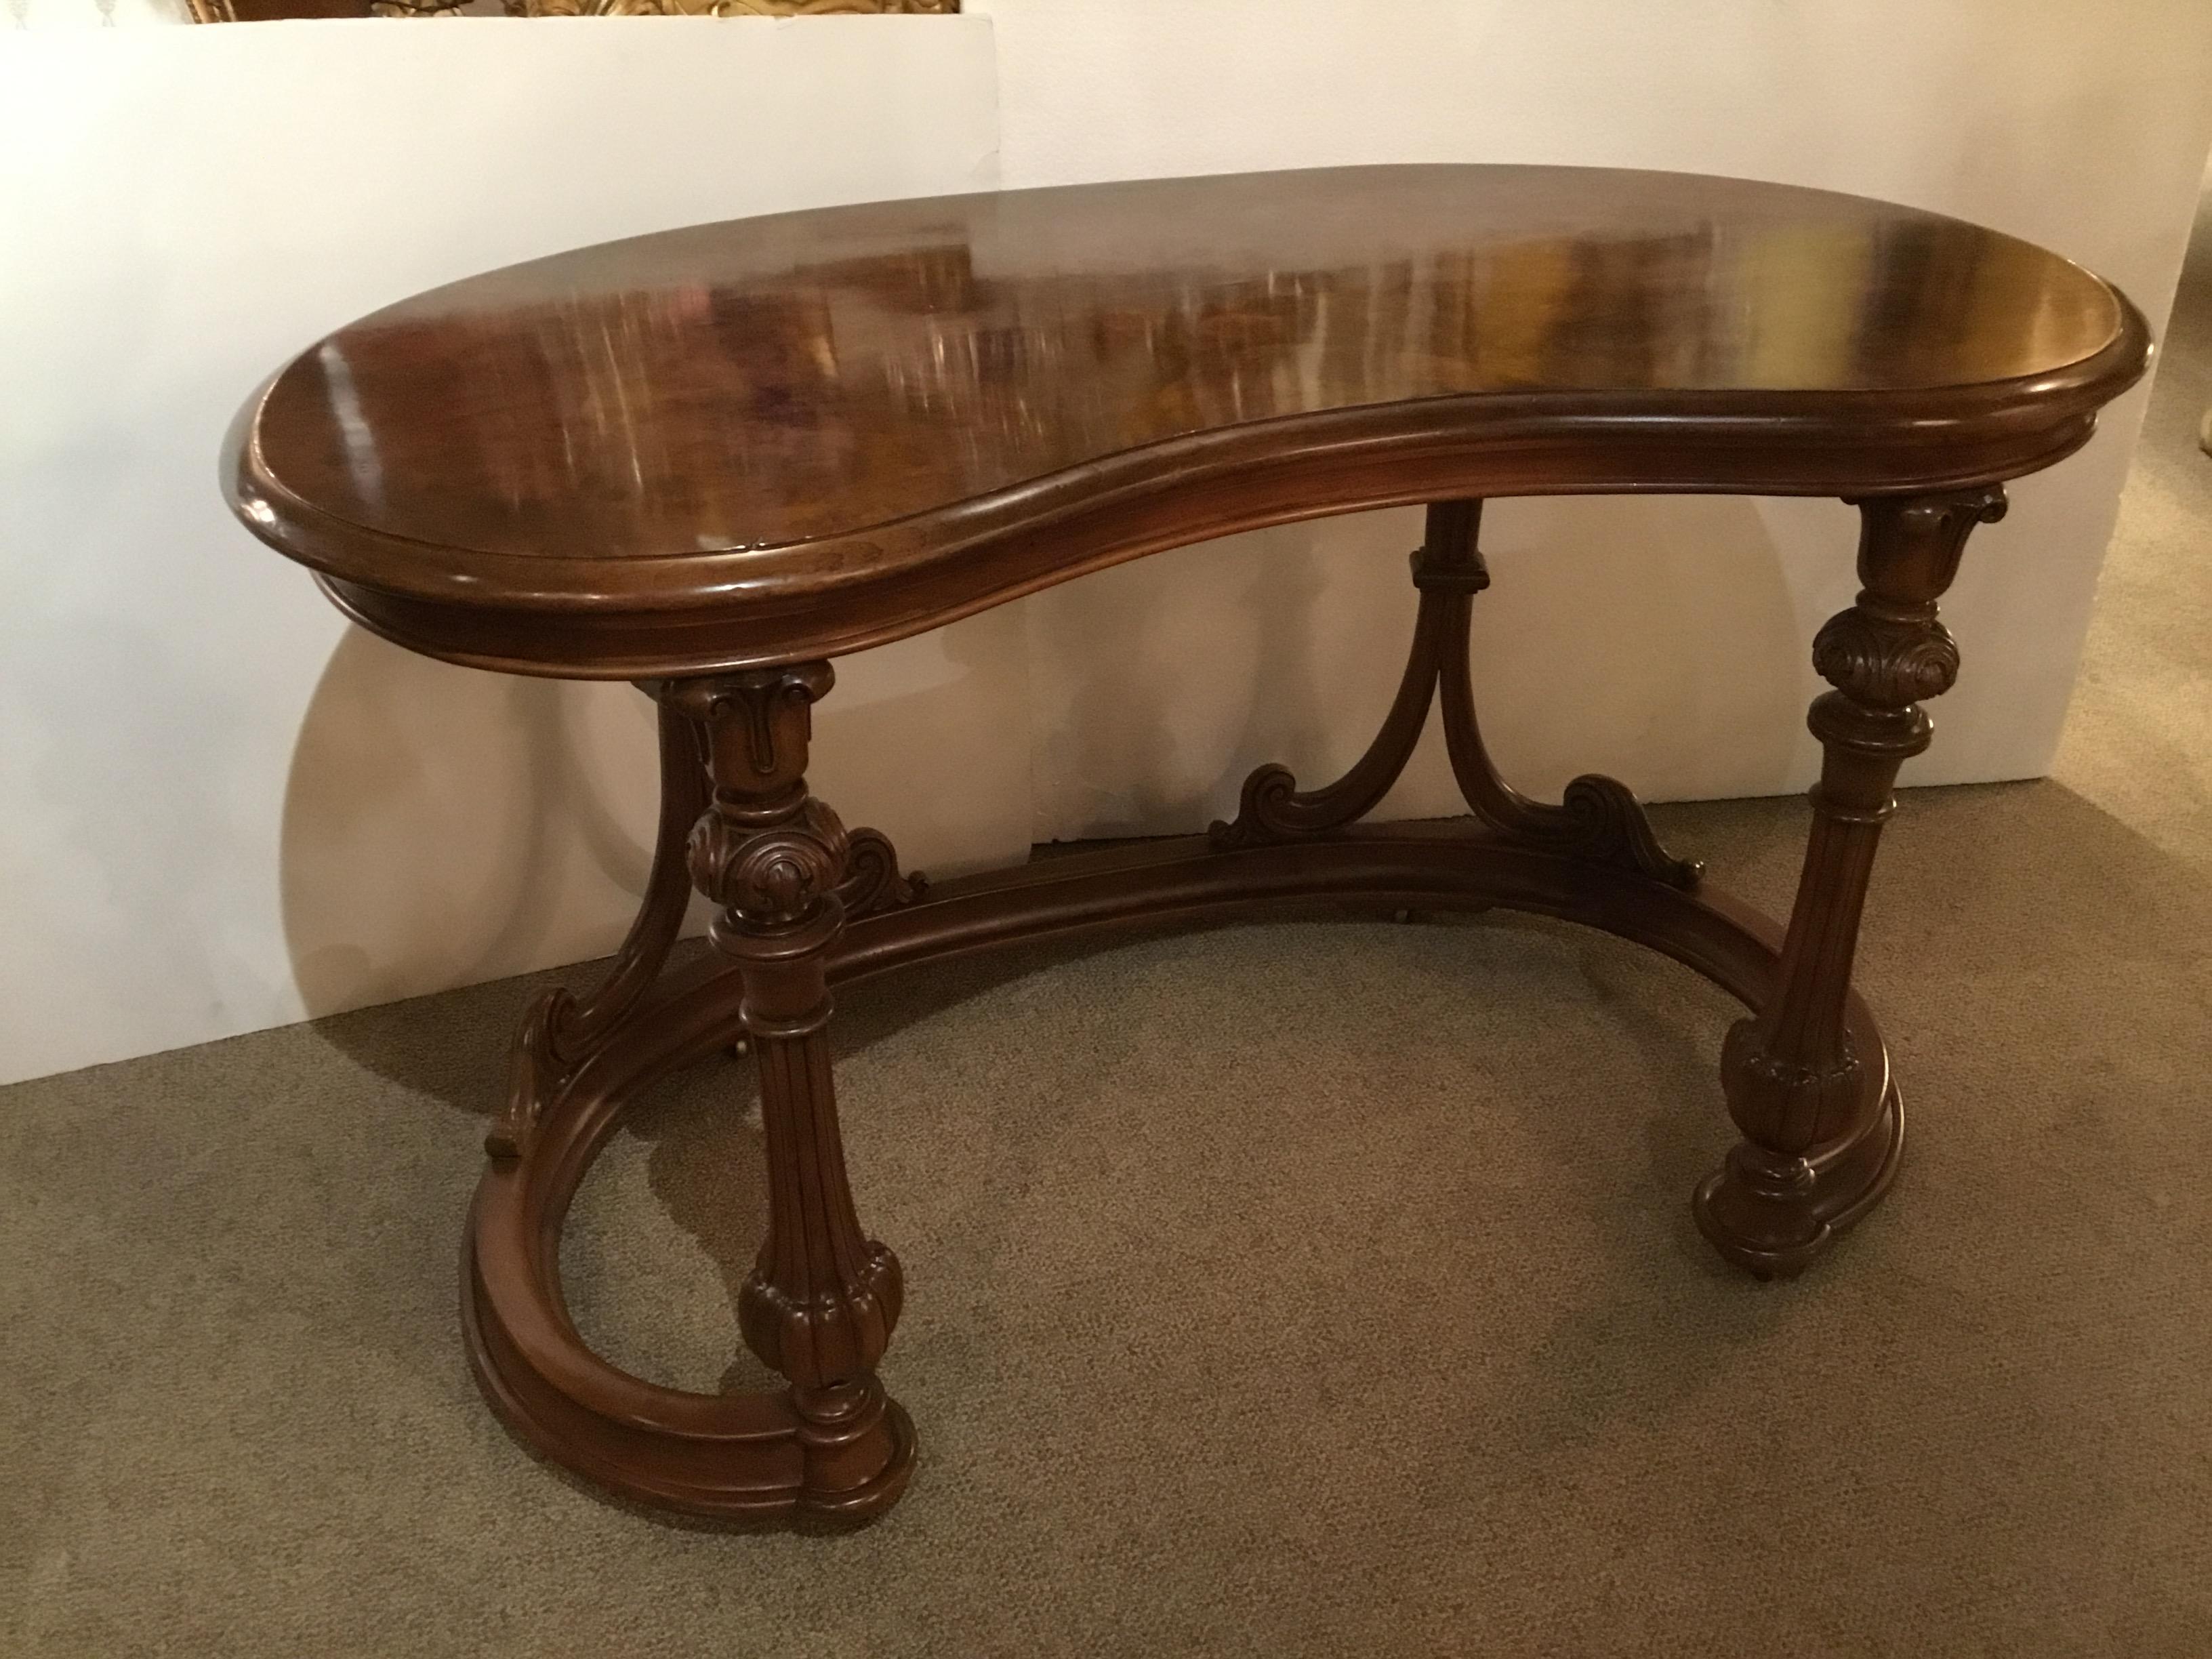 French burl wood kidney form writing desk, 19th century, having a kidney-shaped top,
over foliate carved columns and back supports, on curved stretcher base, rising on casters.